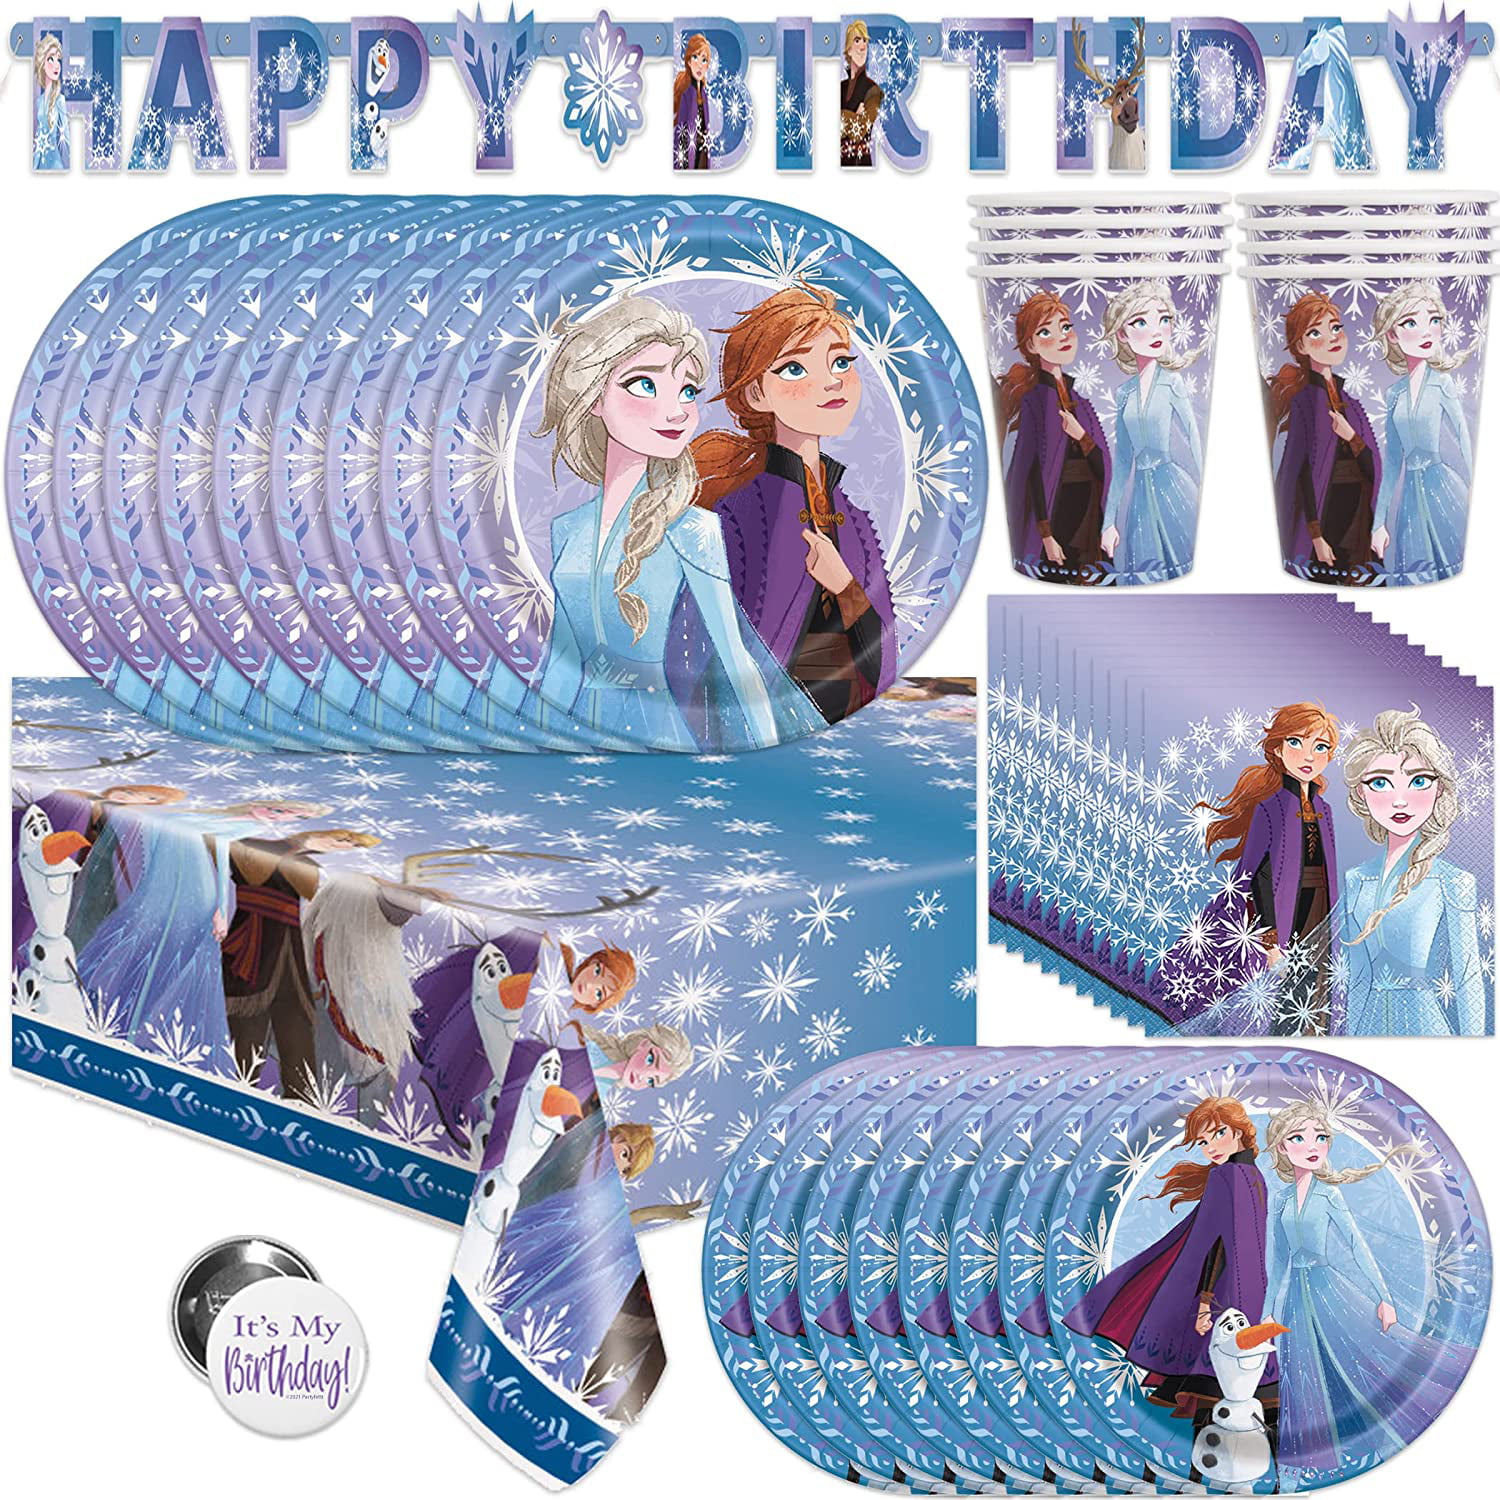 Olaf Value Party Pack 40 Piece 8 Person Frozen Birthday Party Supplies 